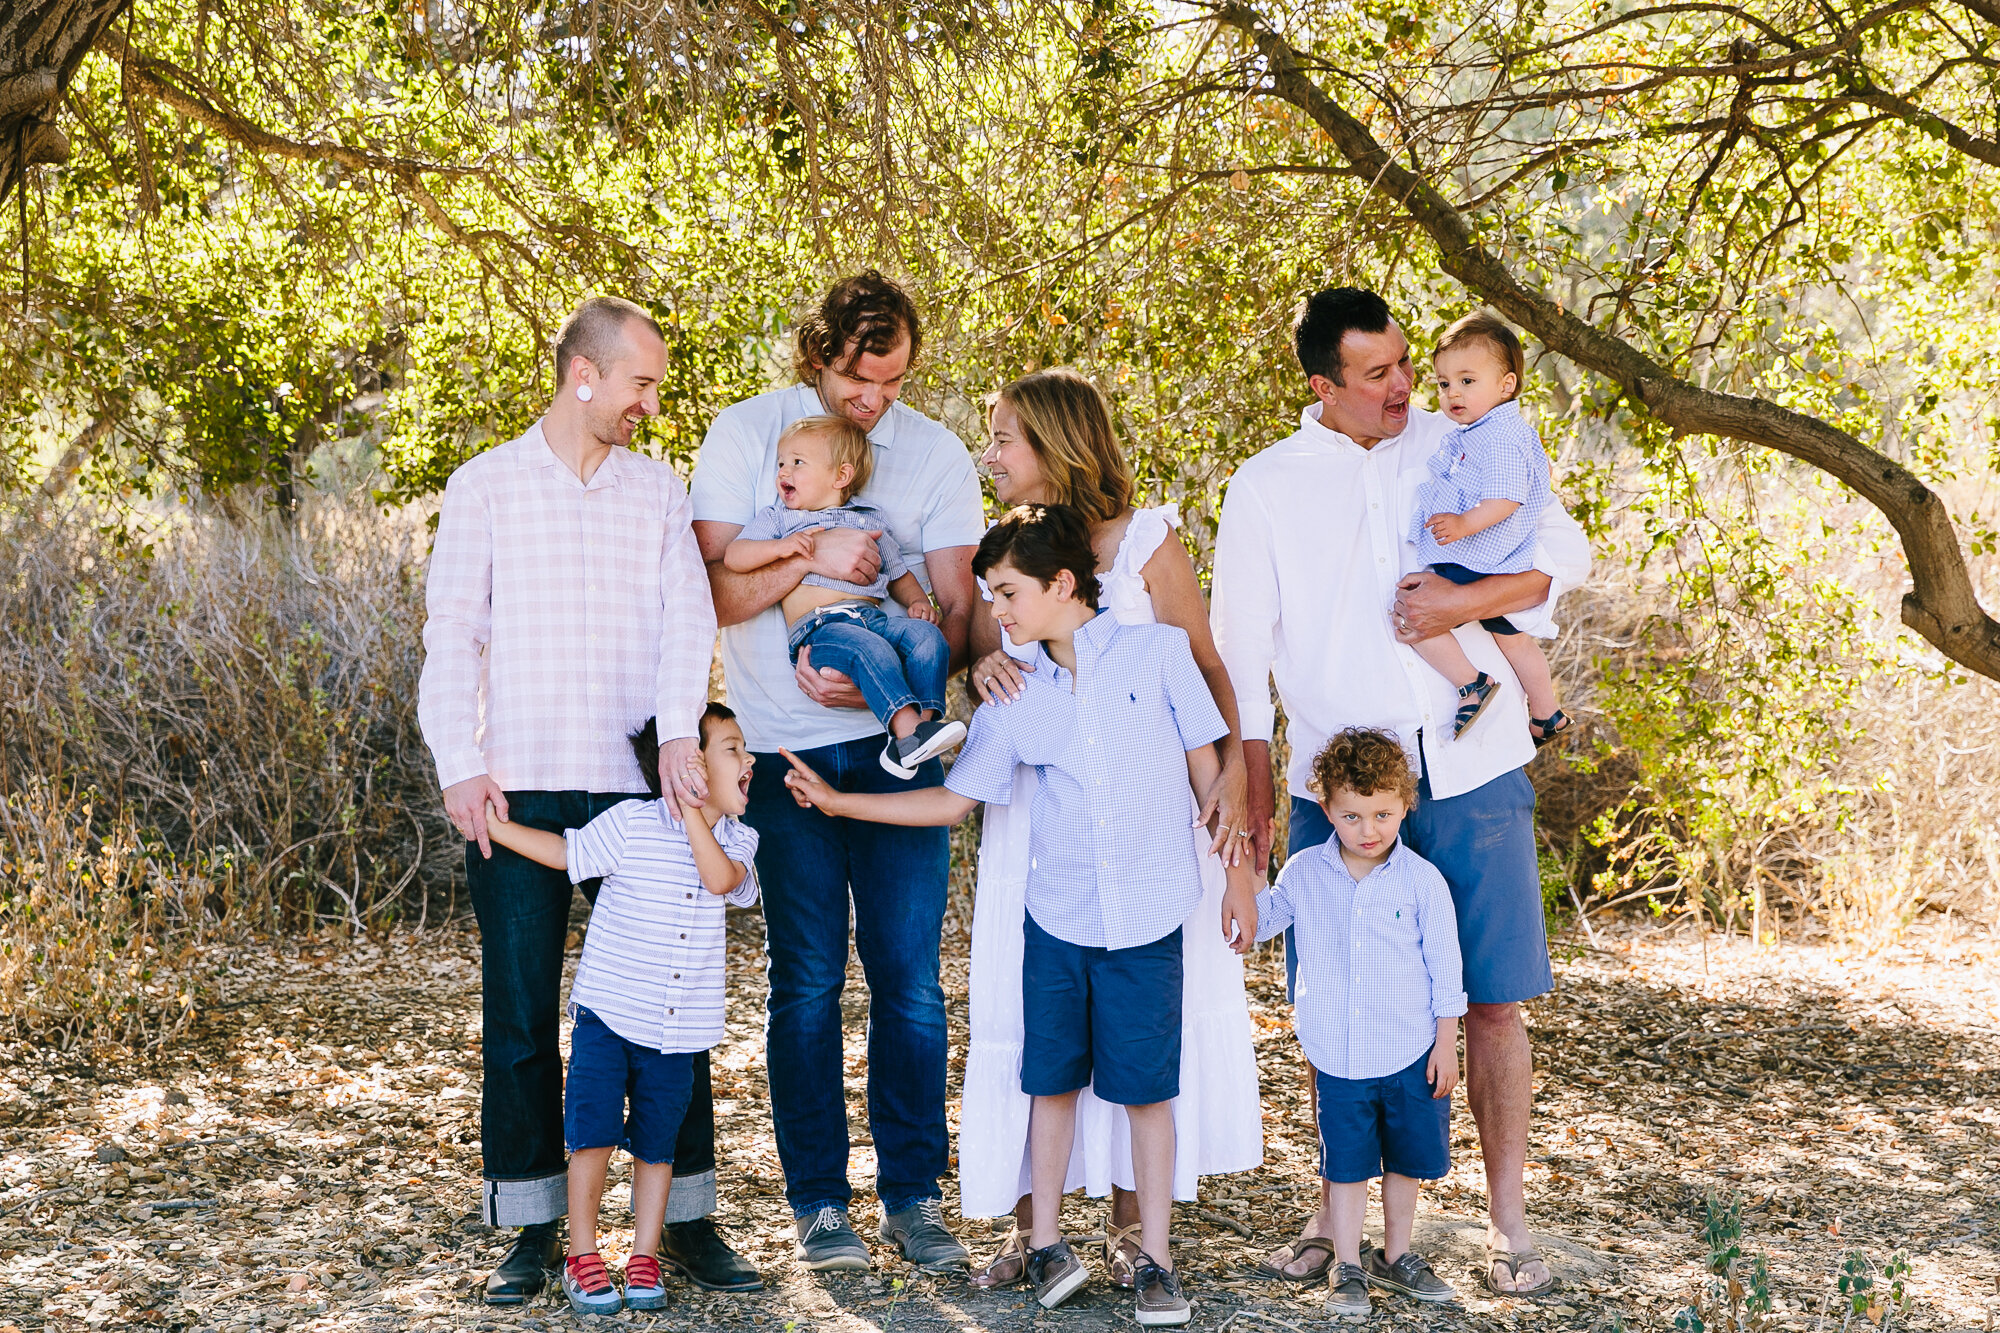 Los_Angeles_Family_Photography_Orange_County_Children_Babies_Field_Farm_Outdoors_Morning_Session_California_Girls_Boys_Kids_Photography-0820.jpg